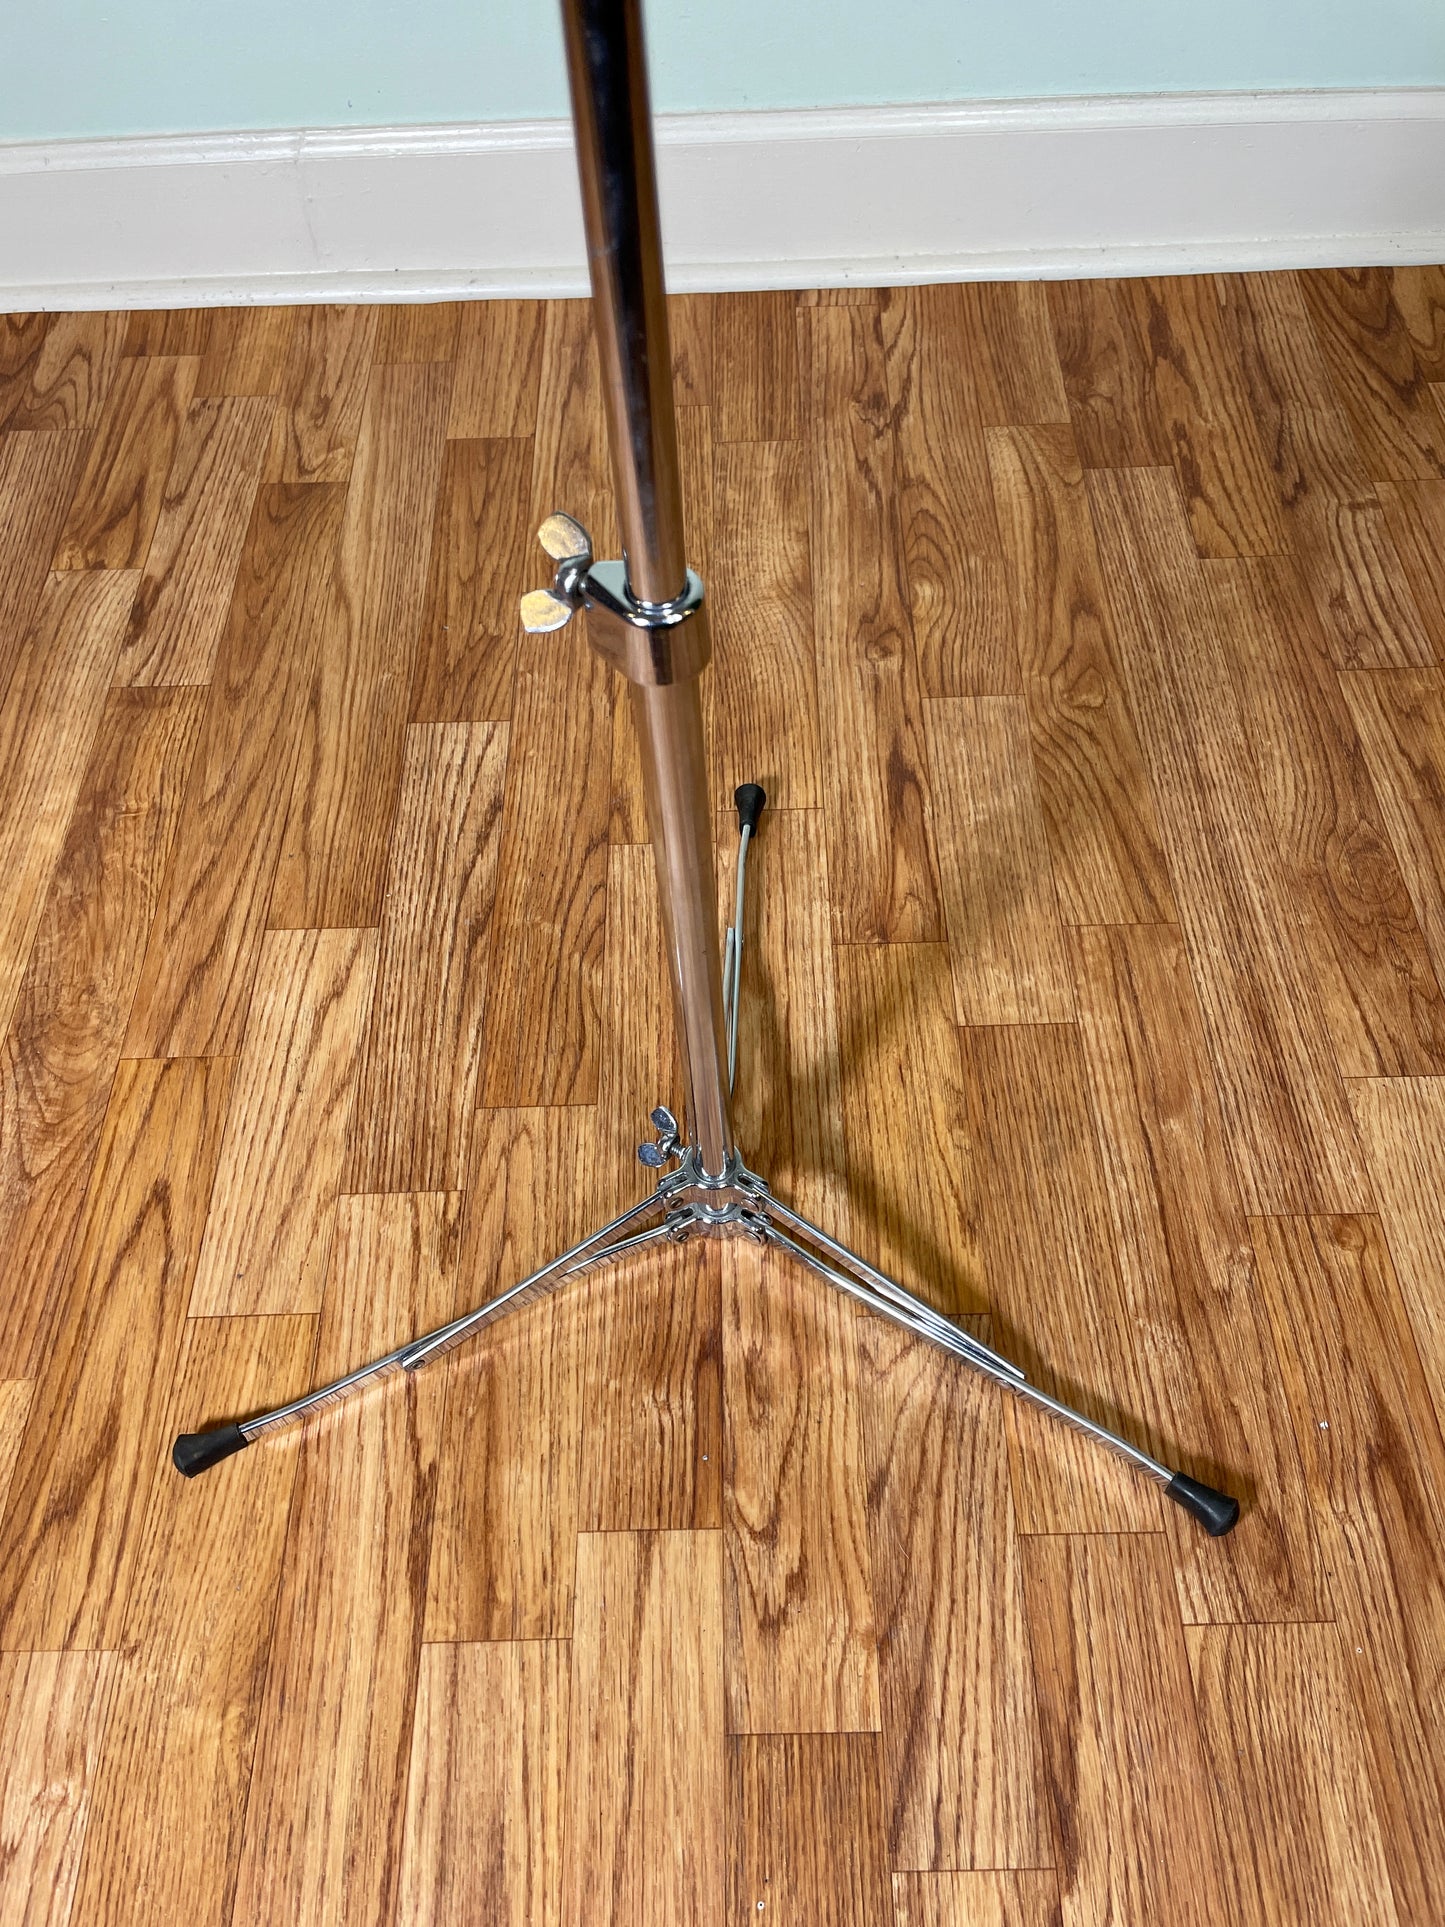 1960s Ludwig 1400 Flat Base Straight Cymbal Stand Clean